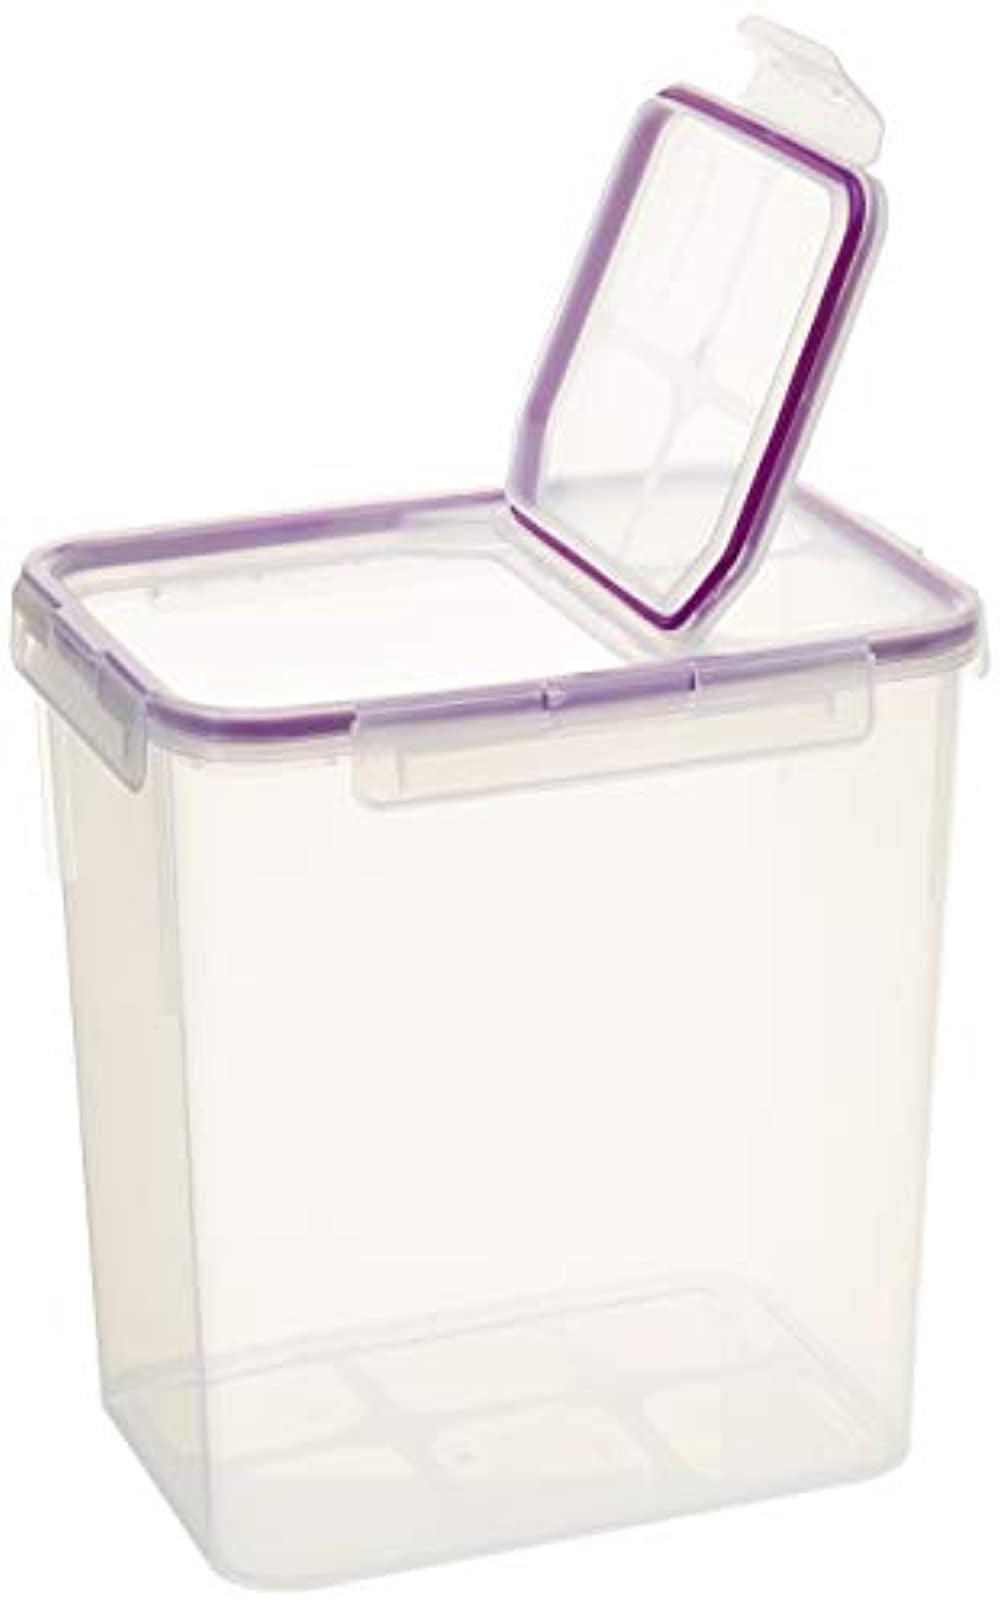 Snapware Rectangle Food Storage Container - Clear/Purple, 23 c - Ralphs